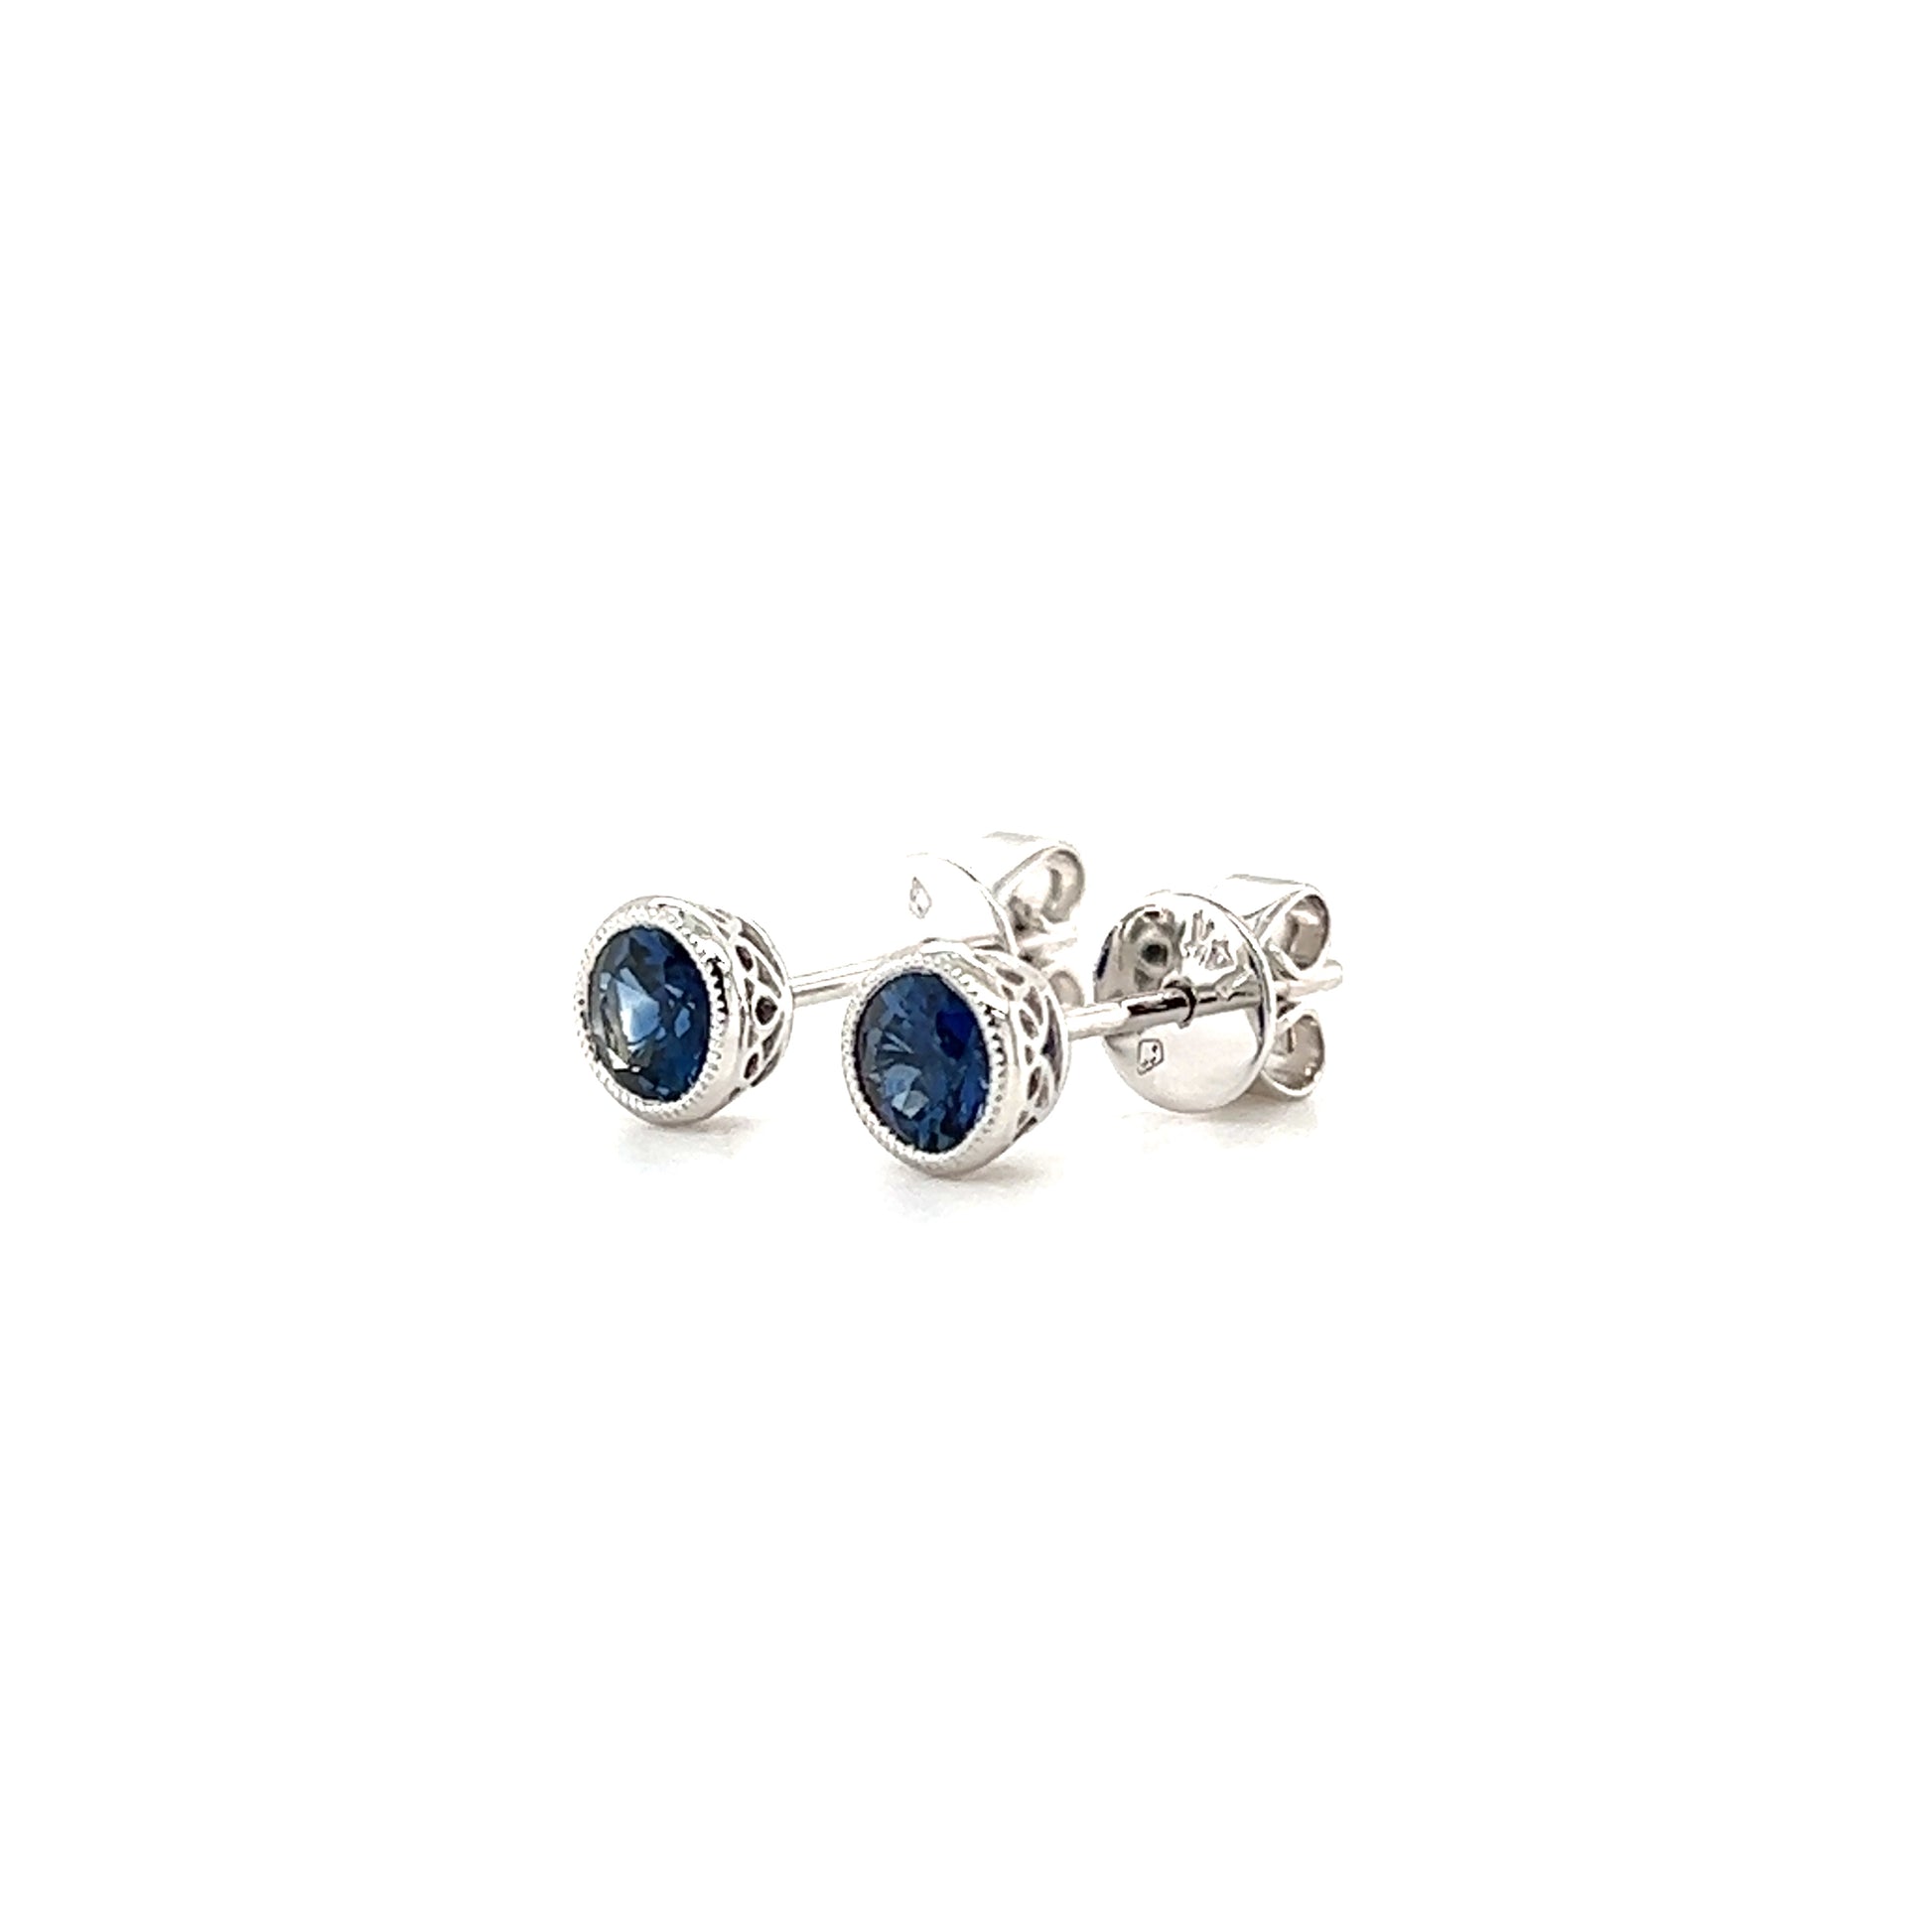 Round Sapphire Stud Earrings with Filigree and Milgrain in 14K White Gold Left Side View